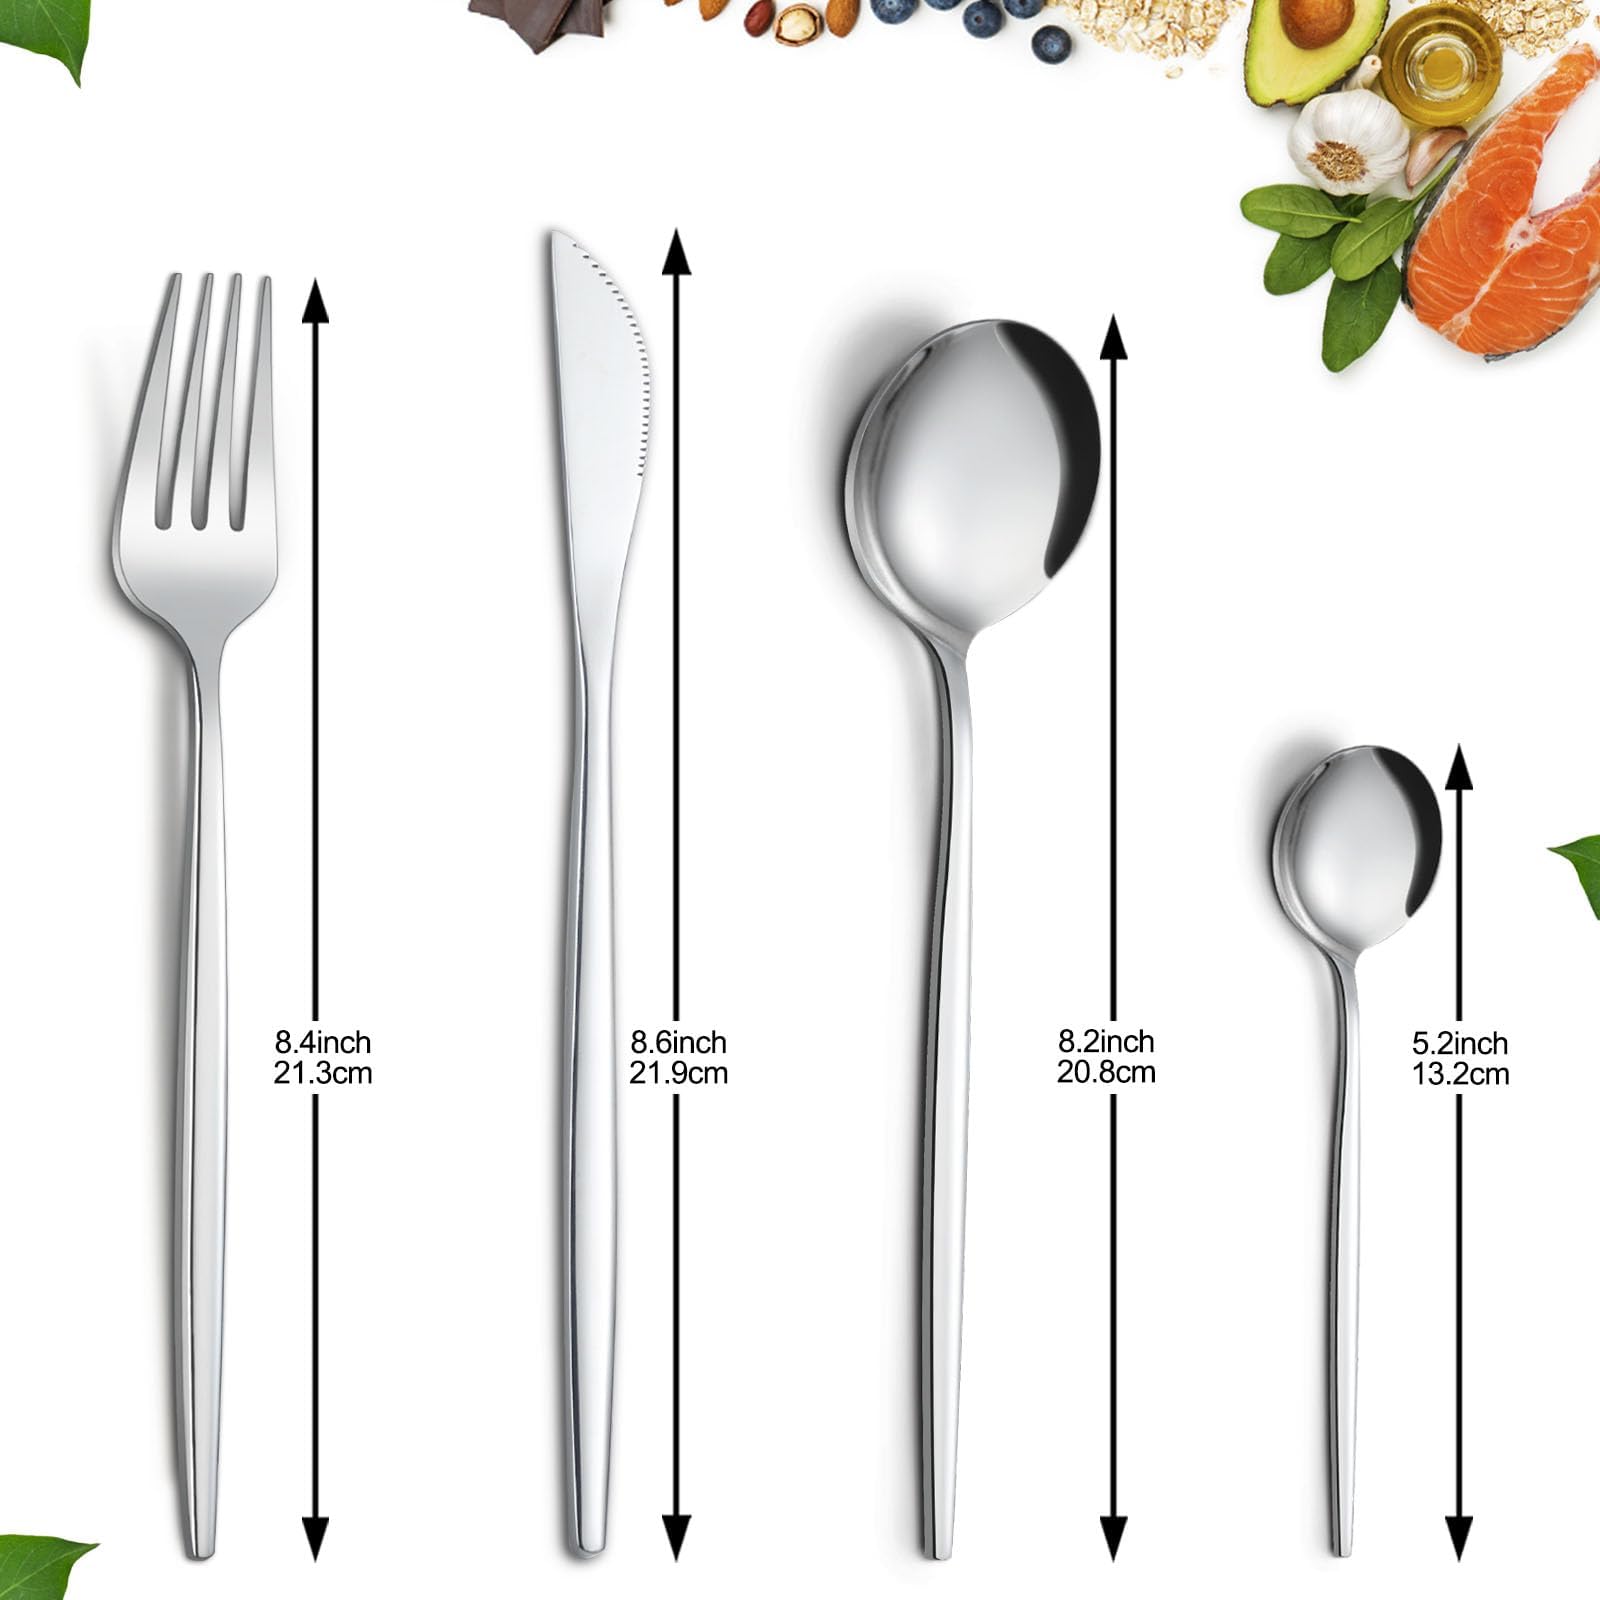 BEWOS 16 Piece Cutlery Set for 4, Cutlery Includes Forks, Steak Knives and Spoons, Dishwasher Safe Tableware for Home Restaurants, Knife and Fork Sets Food-Grade Stainless Steel, Silverware 16P